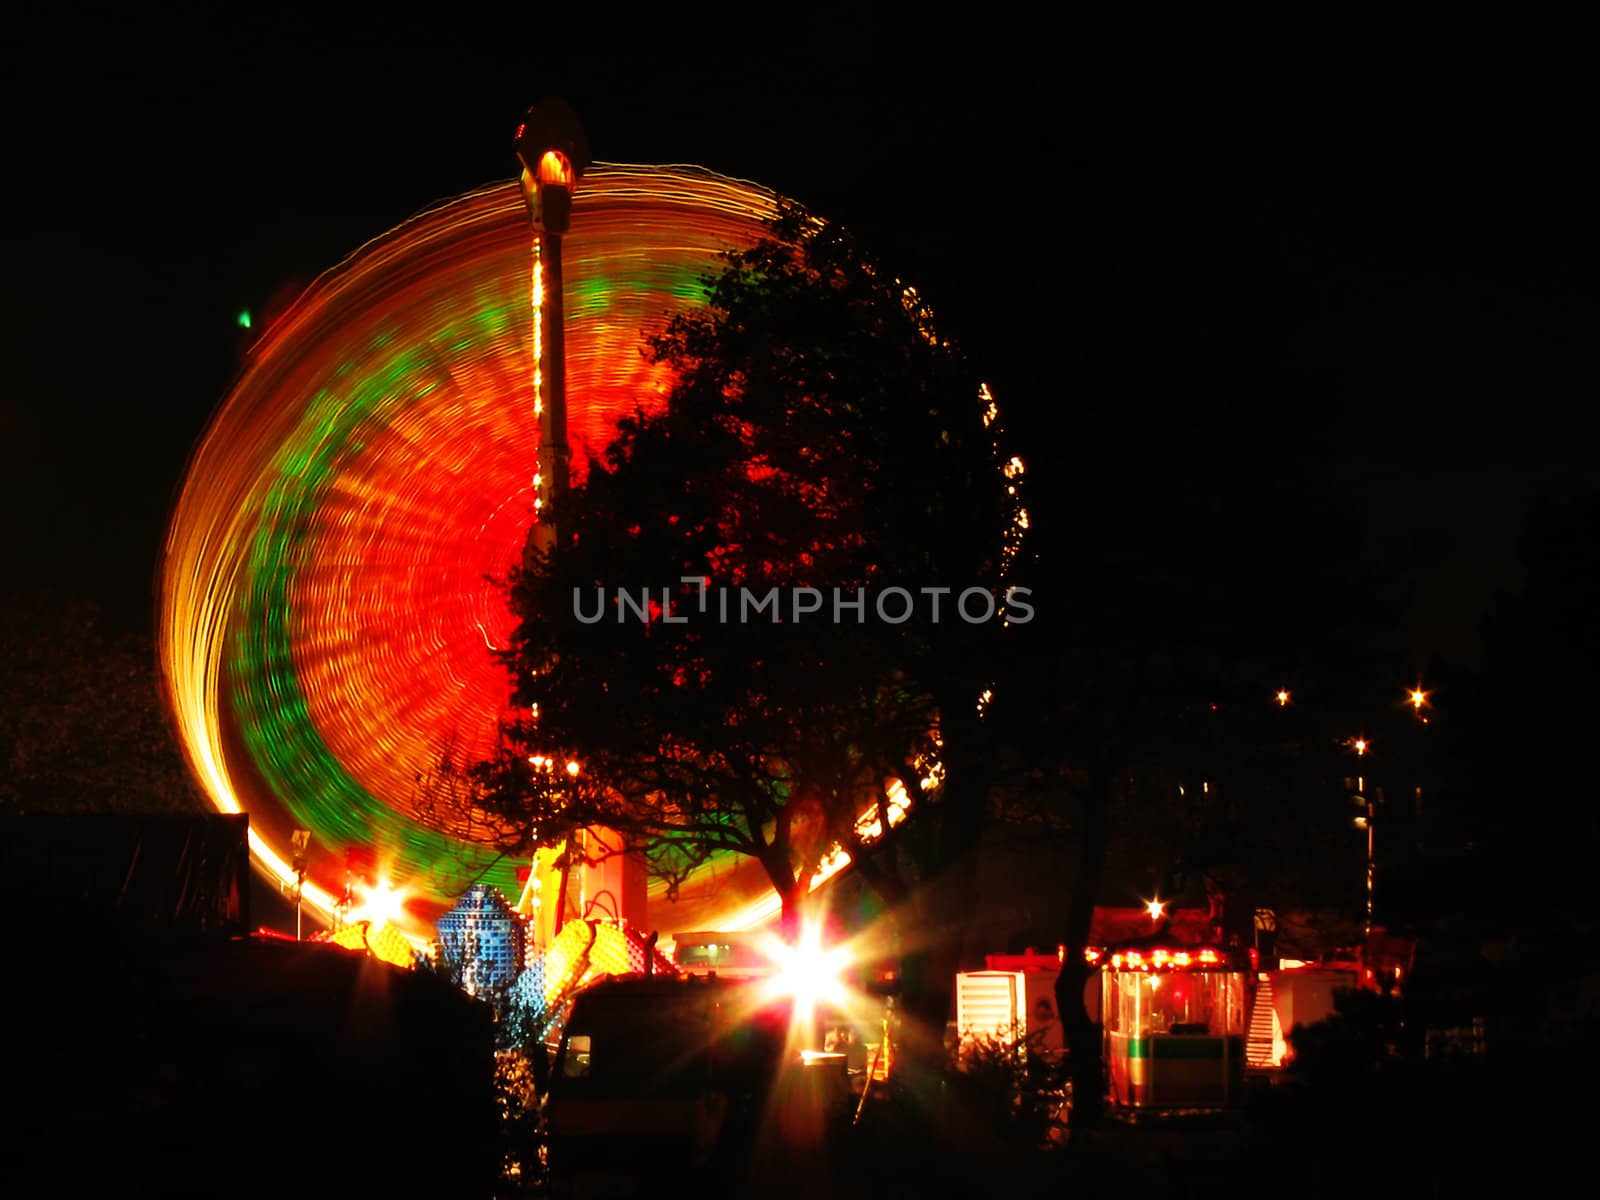 fairground by tommroch